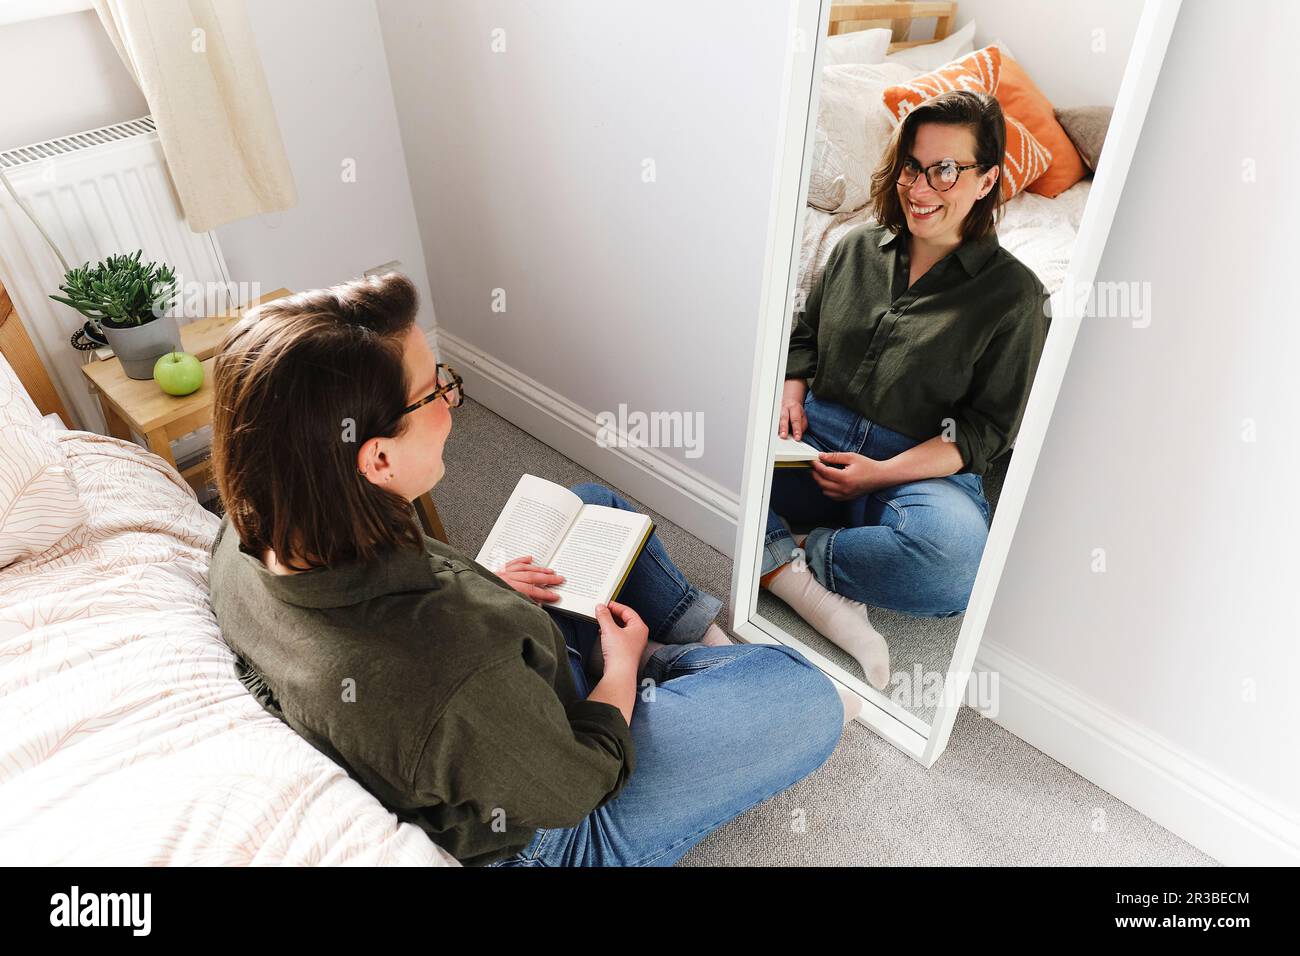 Happy woman sitting with book near mirror at home Stock Photo